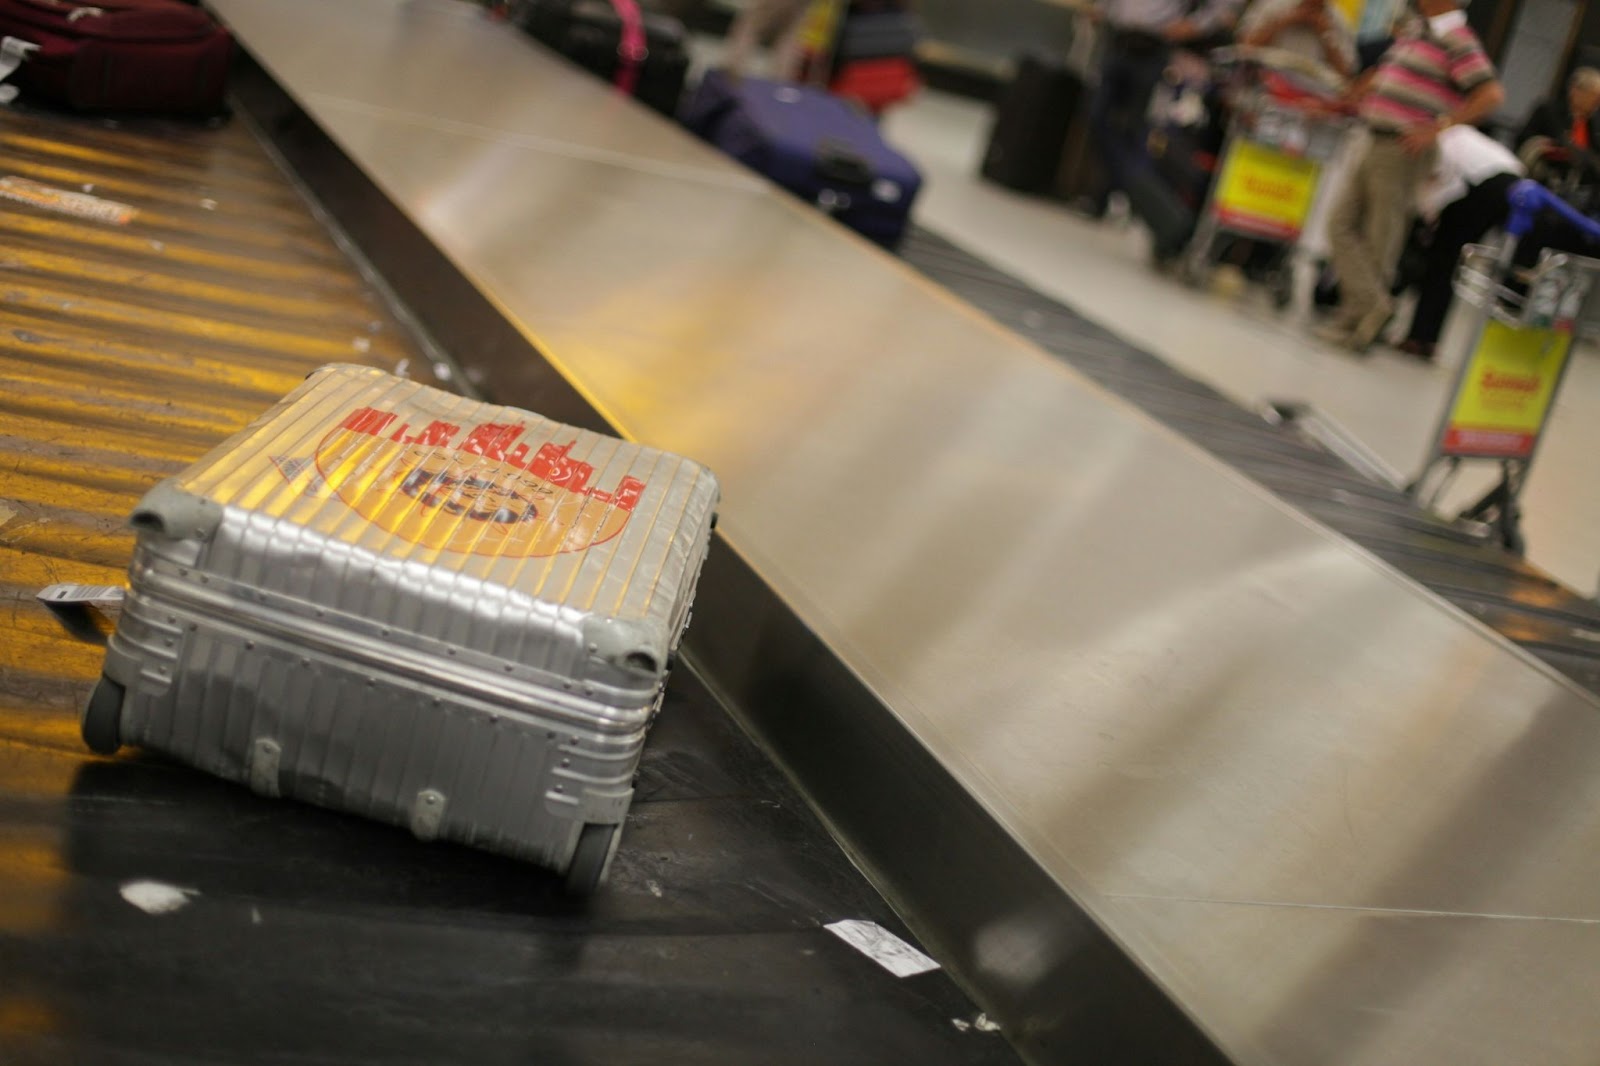 Spirit Airlines Checked Baggage Policy
